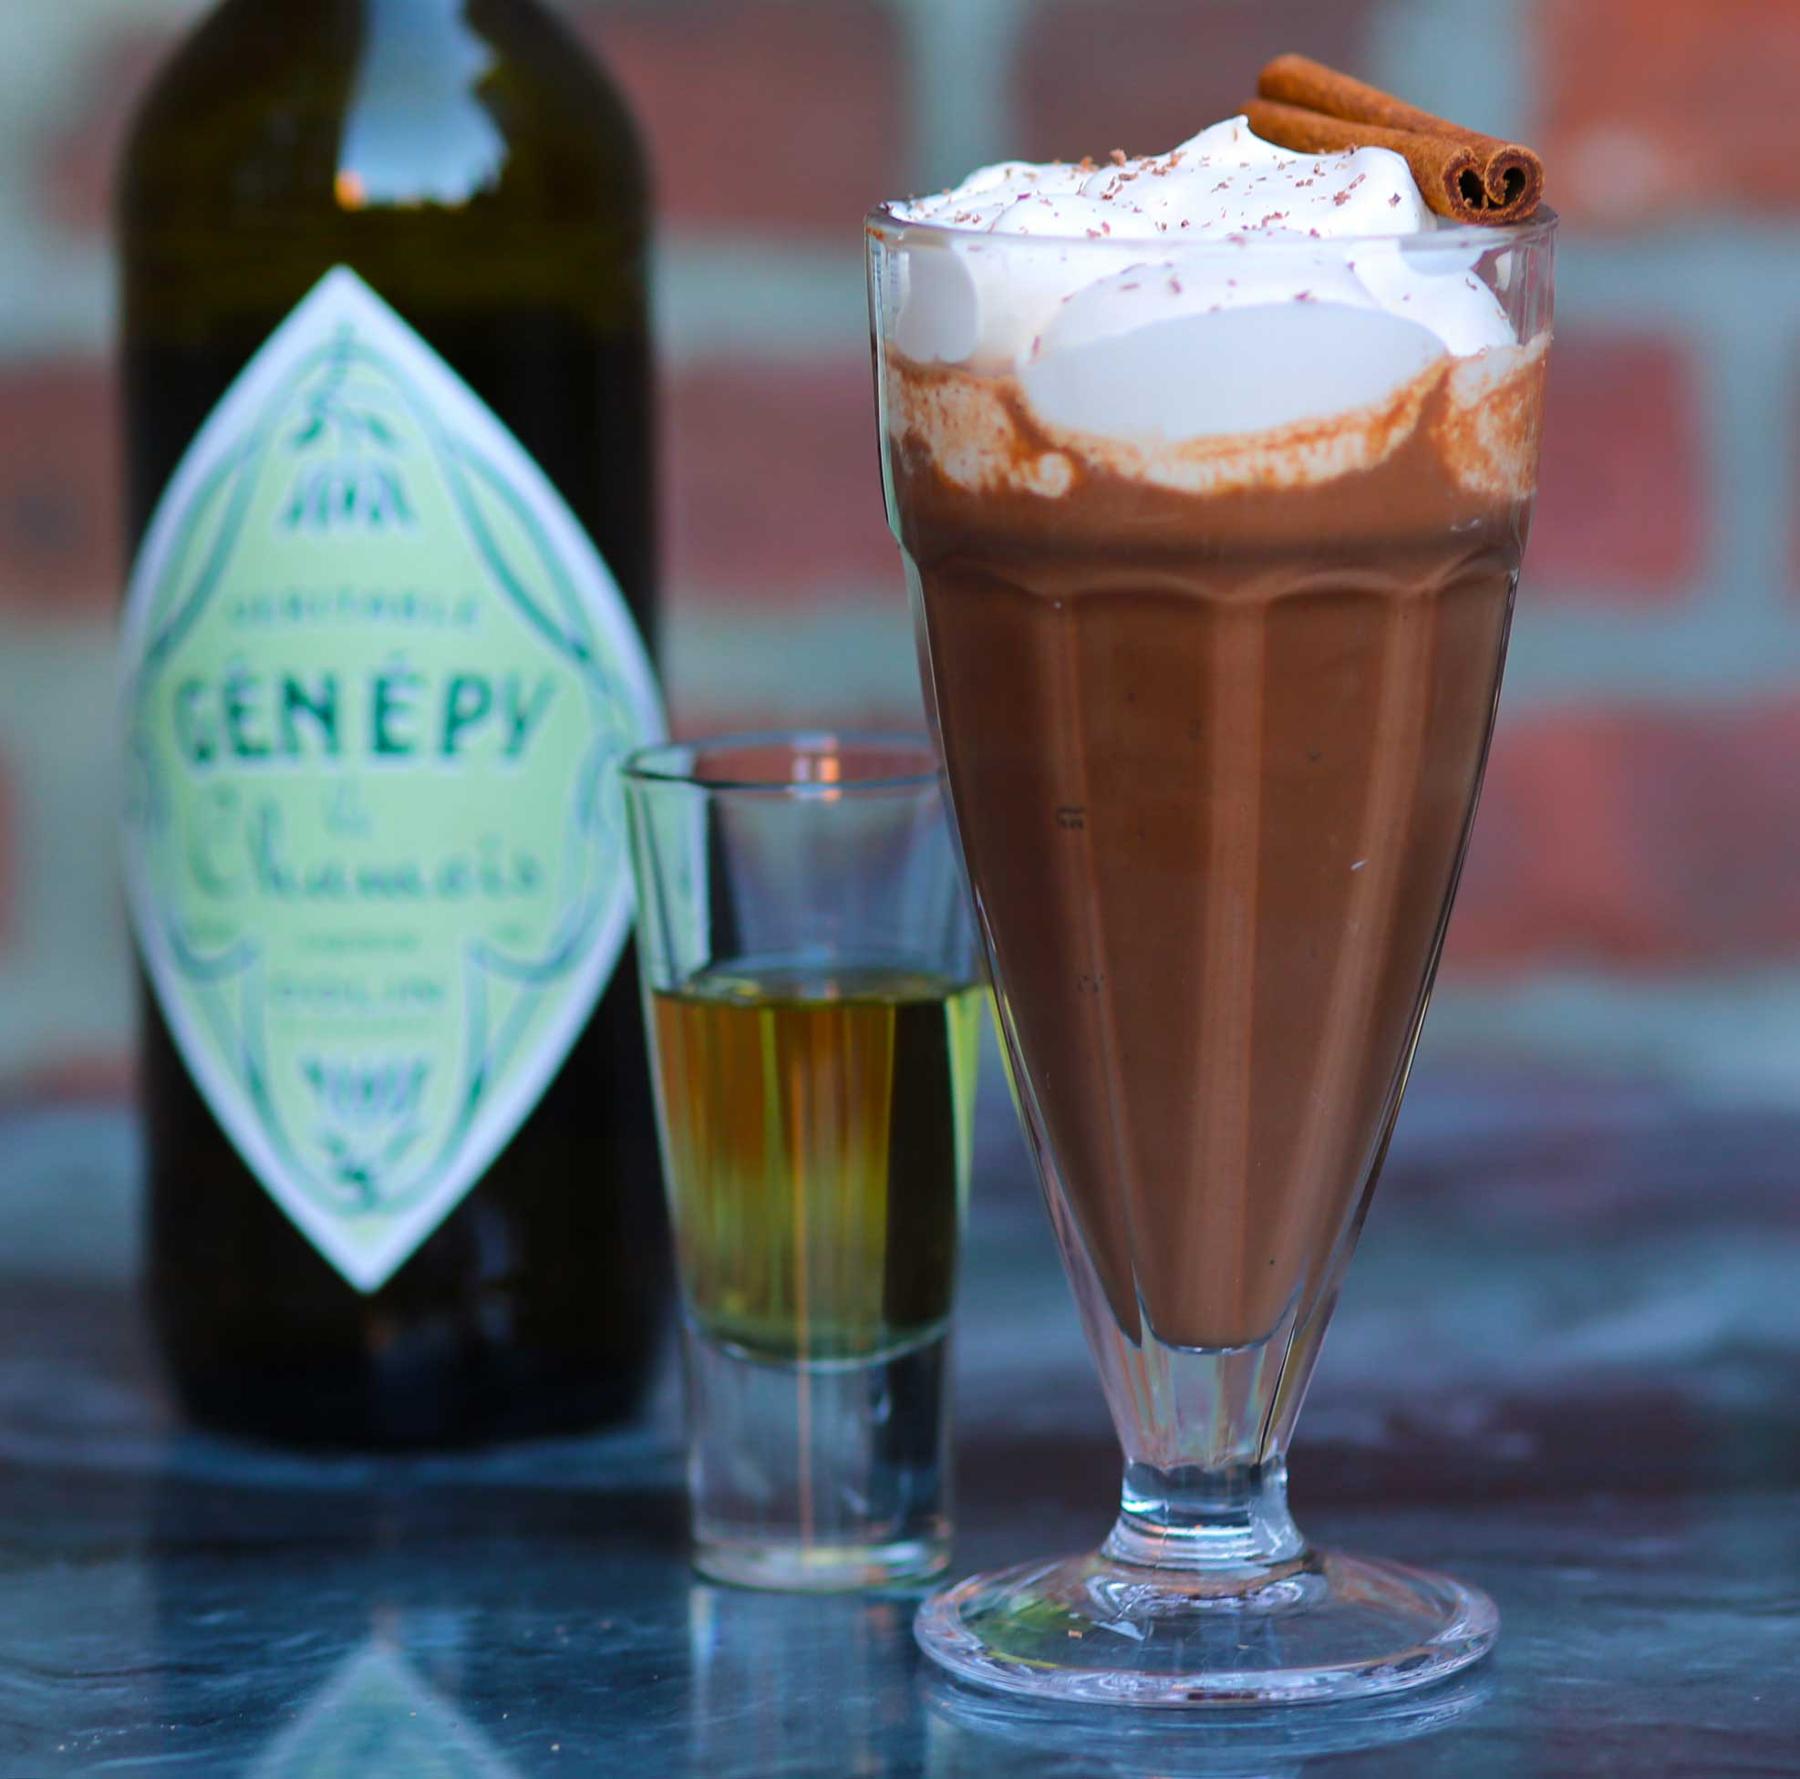 An example of the Génépy Chaud, the mixed drink (drink) featuring drinking chocolate, Dolin Génépy le Chamois Liqueur, and nux alpina whipped cream; photo by Lauren Clark